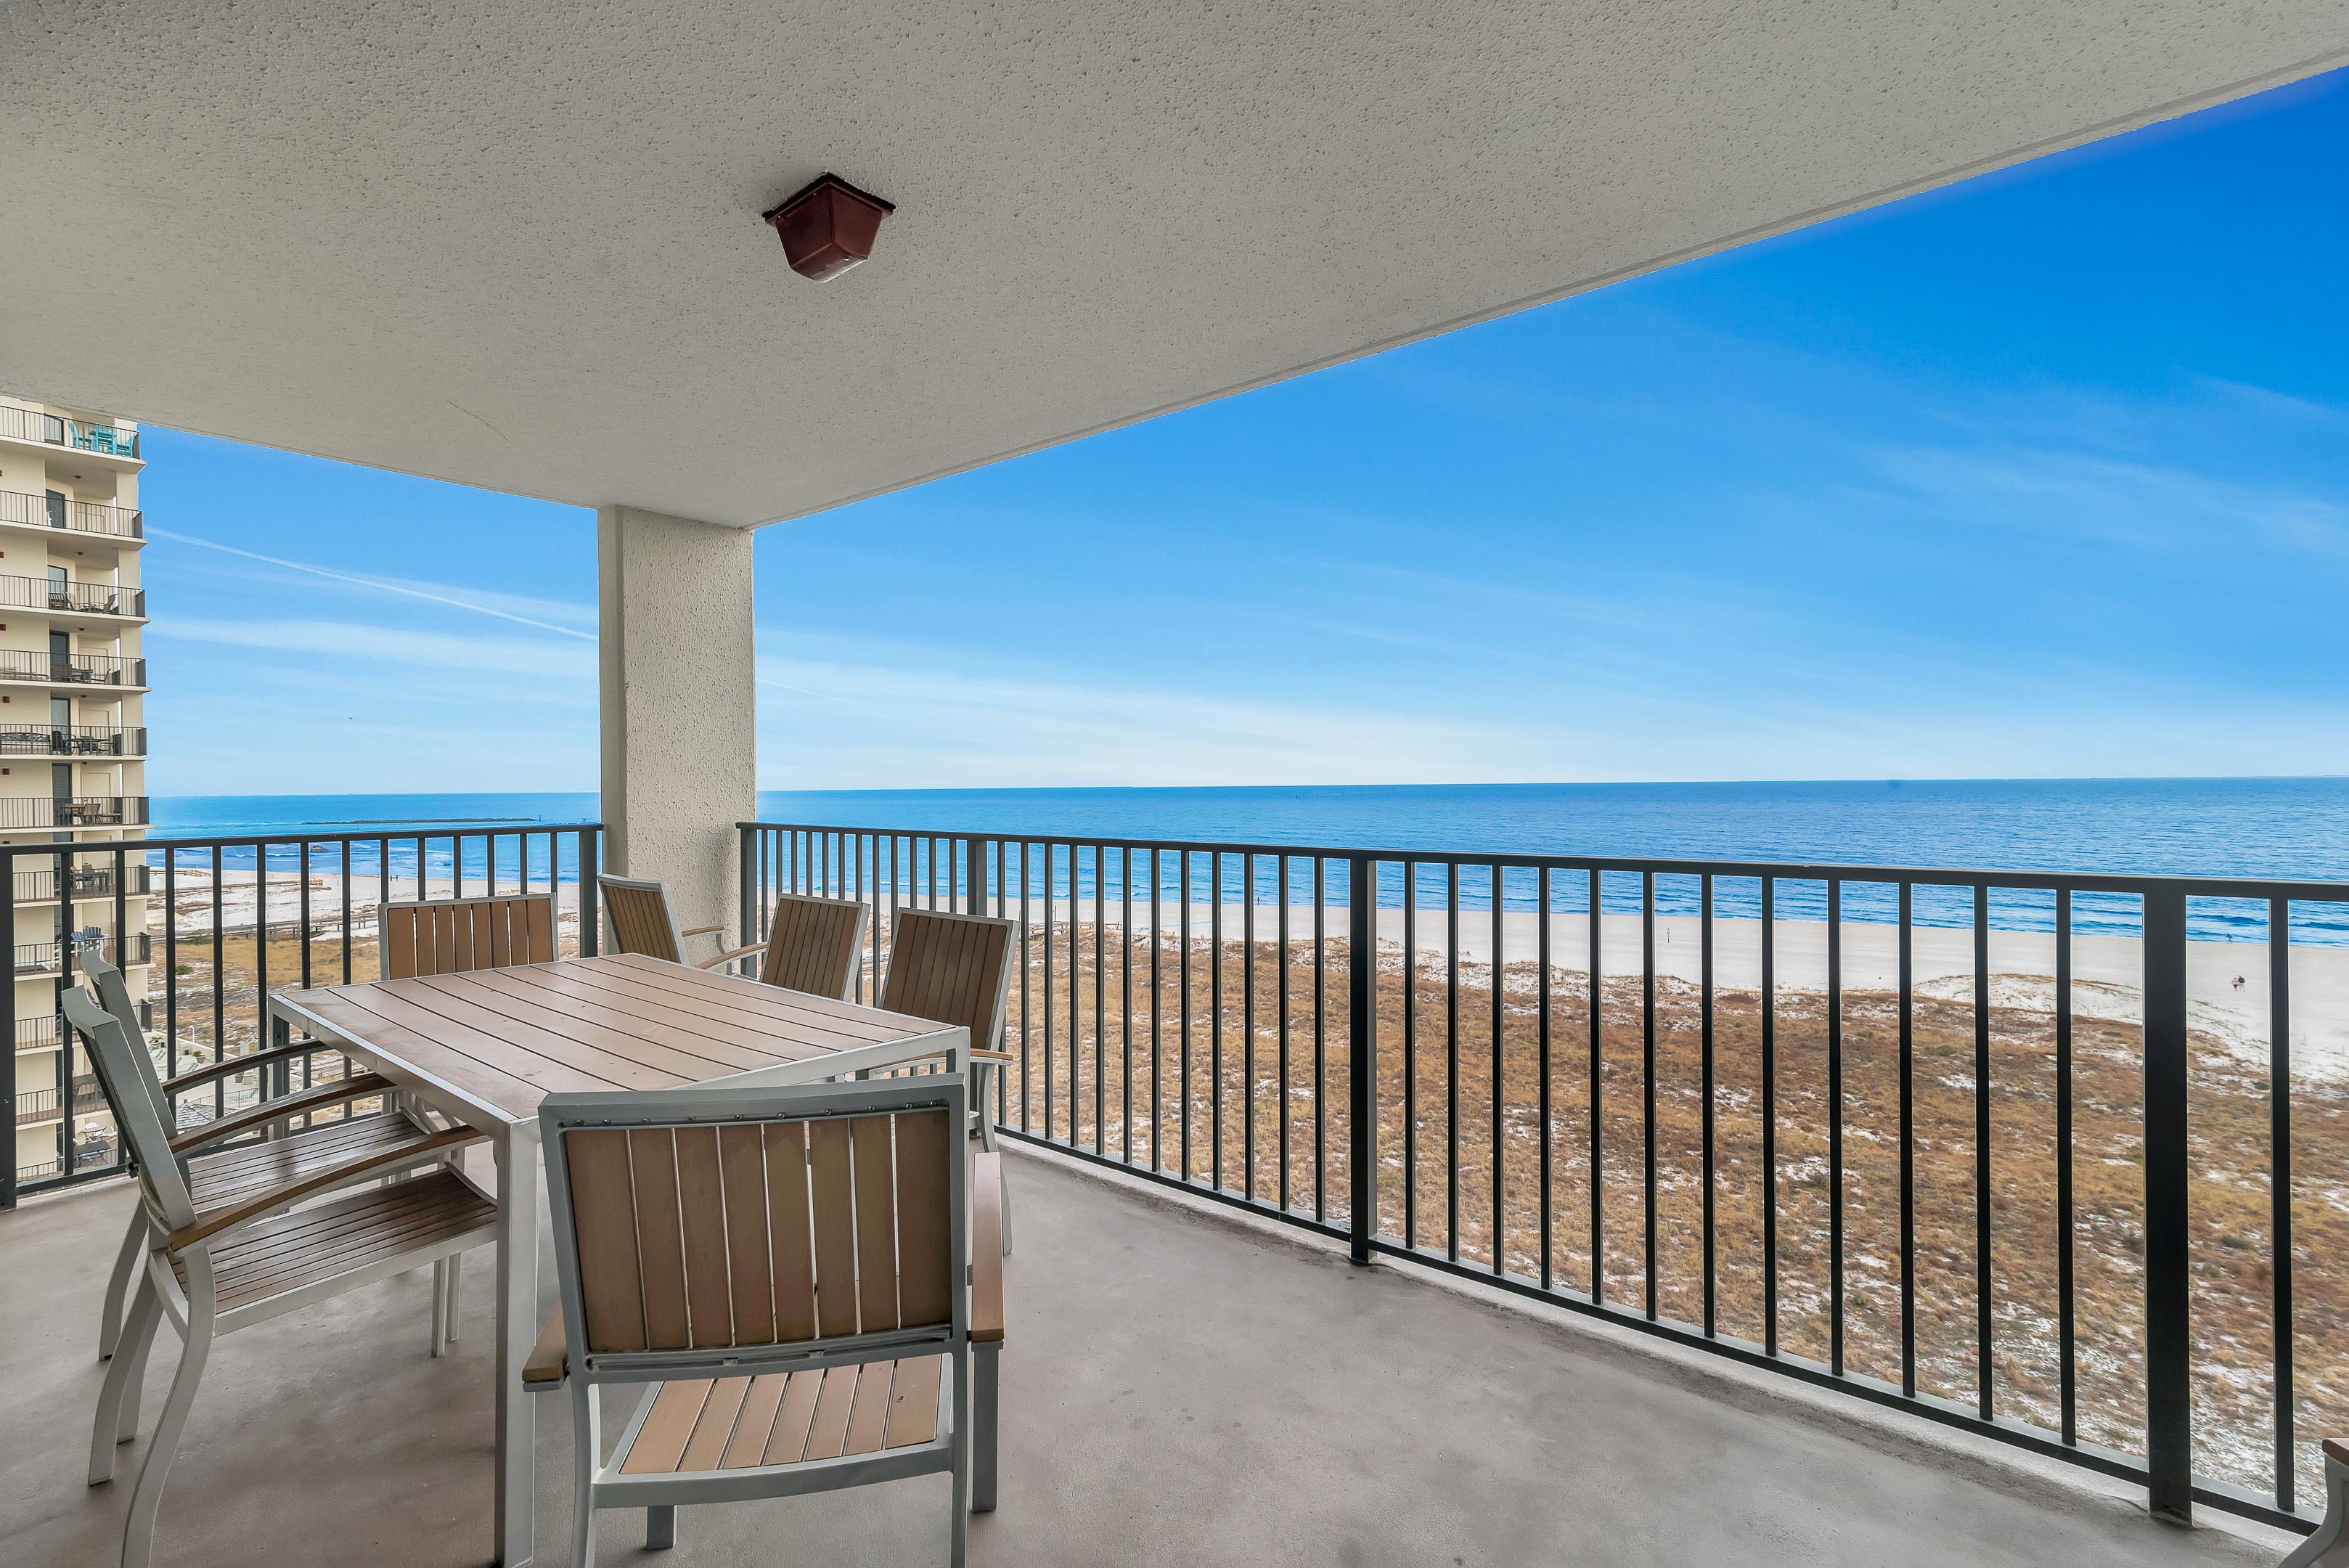 Private Balcony overlooking the Beautiful Gulf of Mexico.